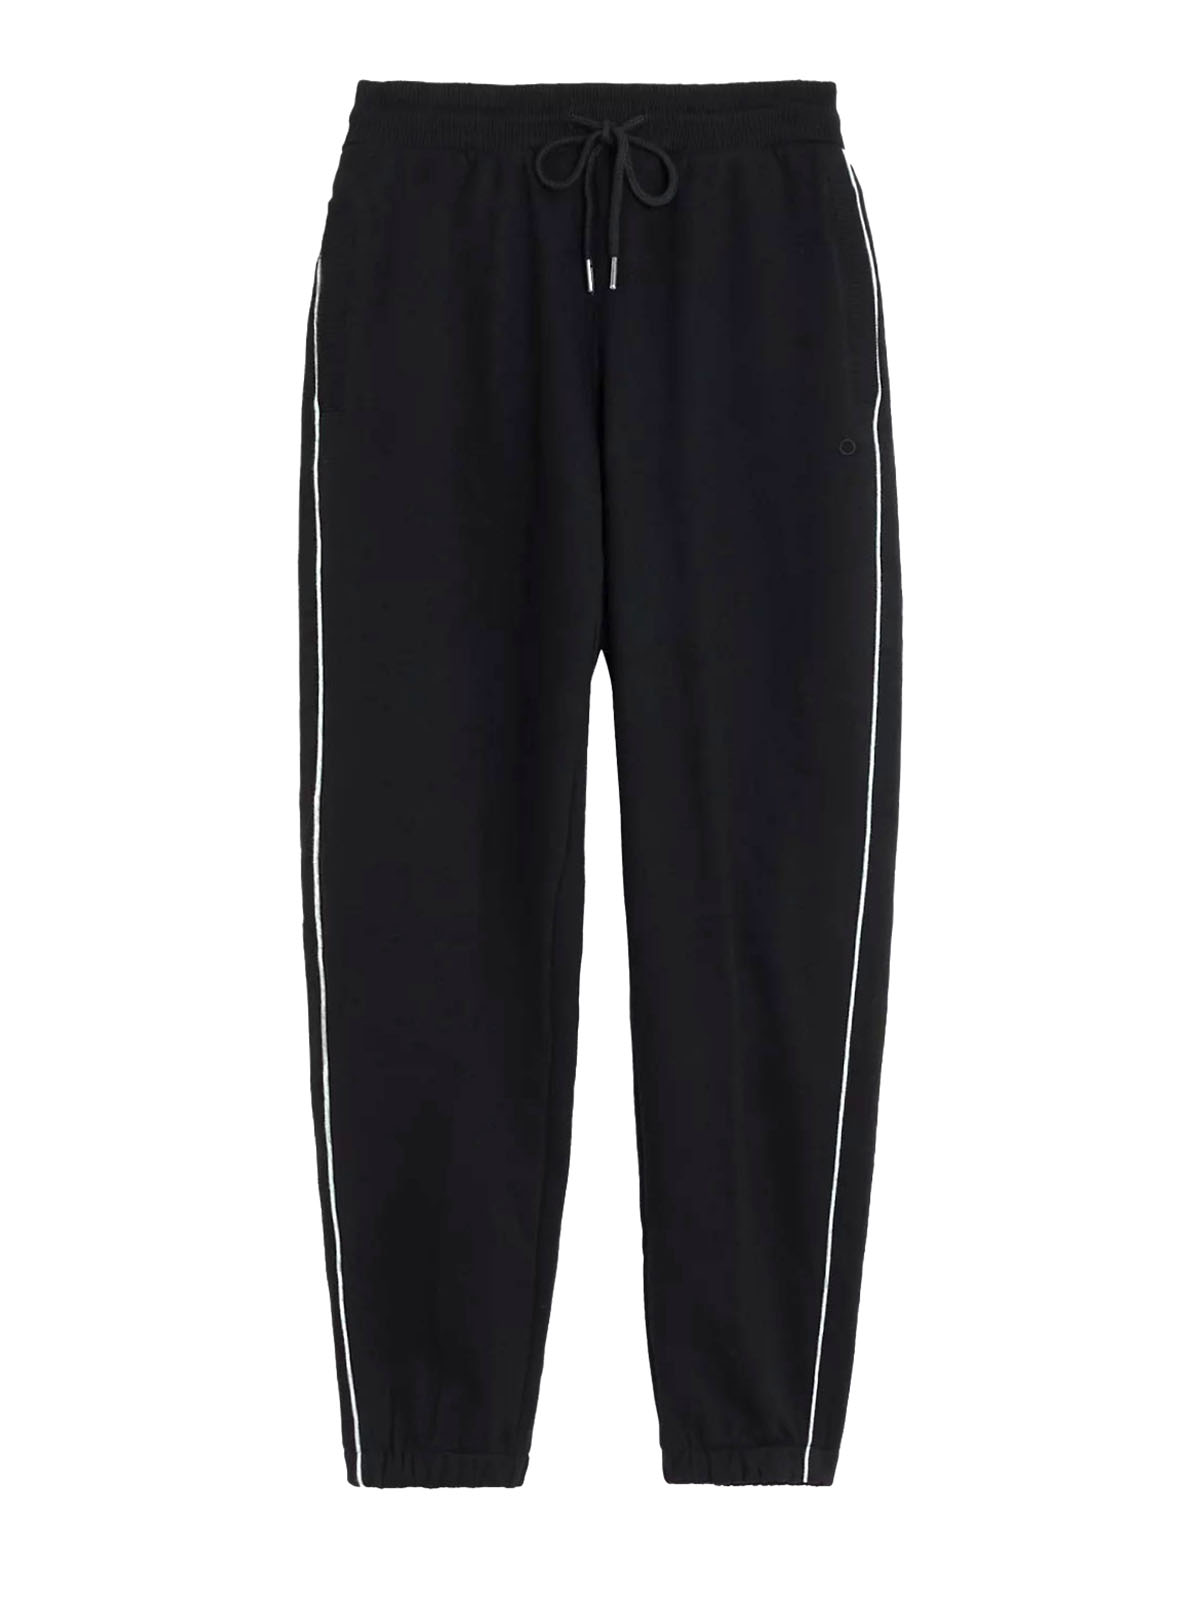 Marks and Spencer - - M&5 ASSORTED Joggers & Leggings - Size 6 to 22